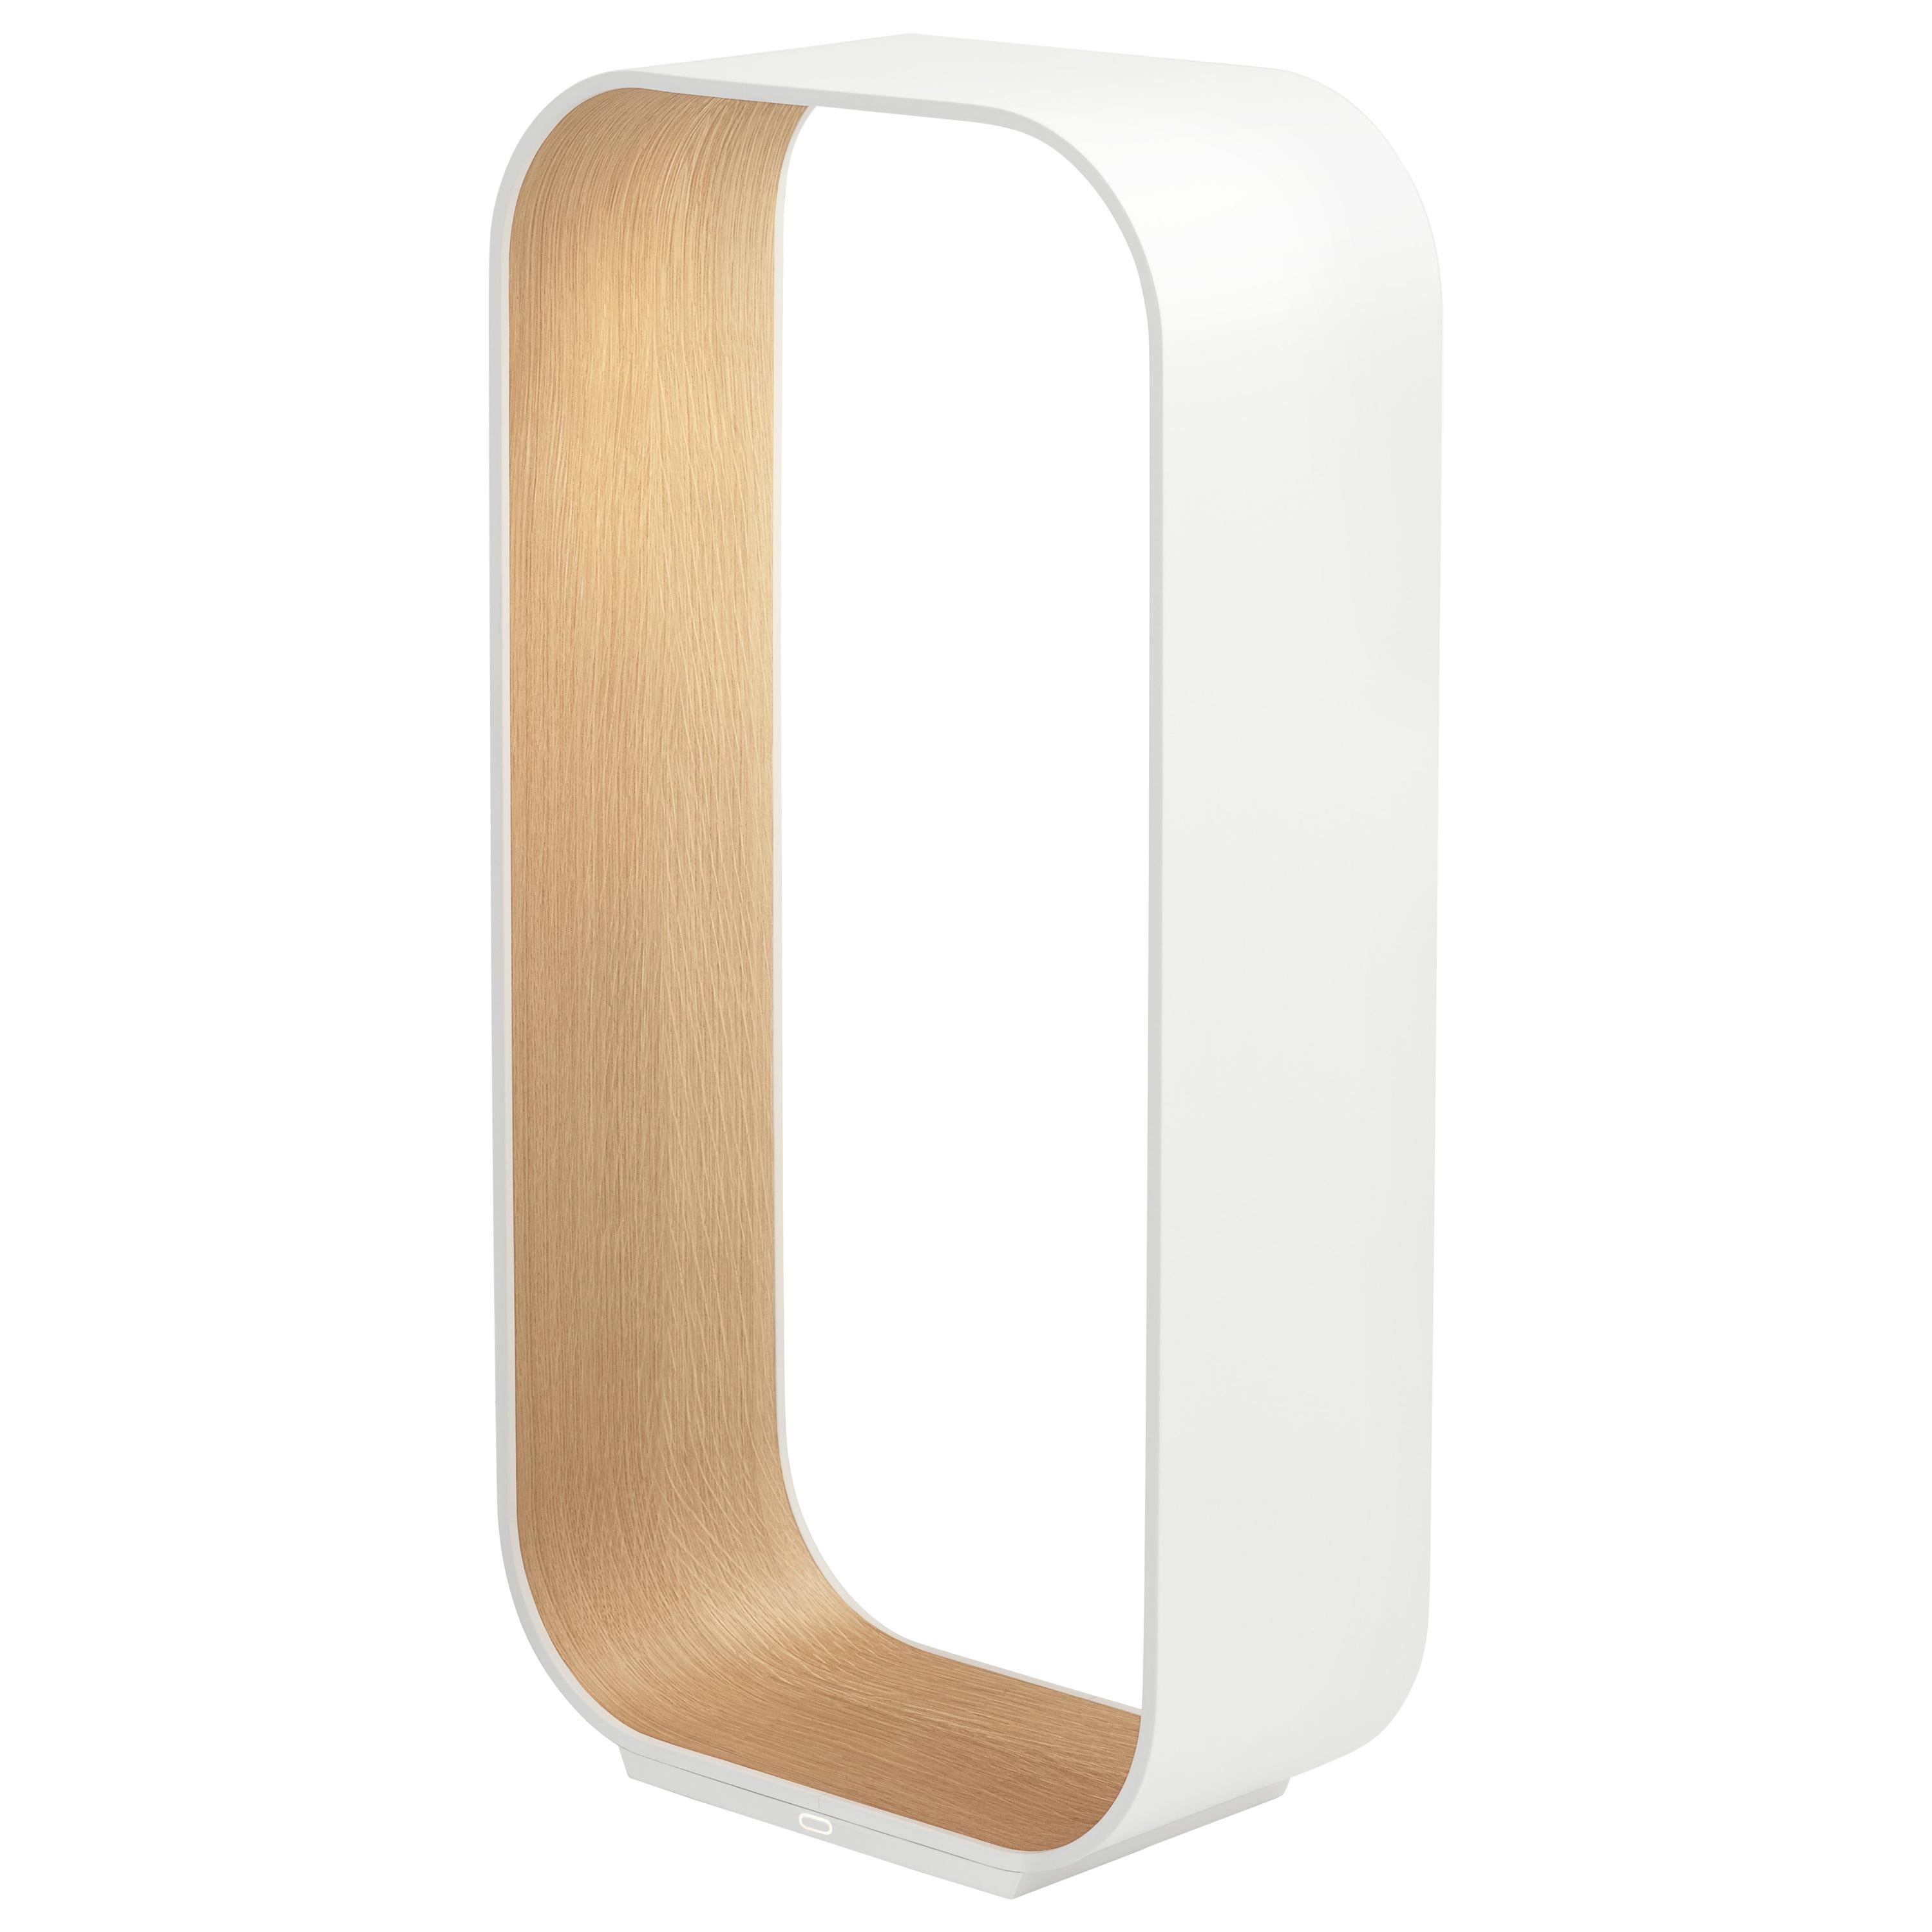 Contour Large Table Lamp in White and White Oak by Pablo Designs